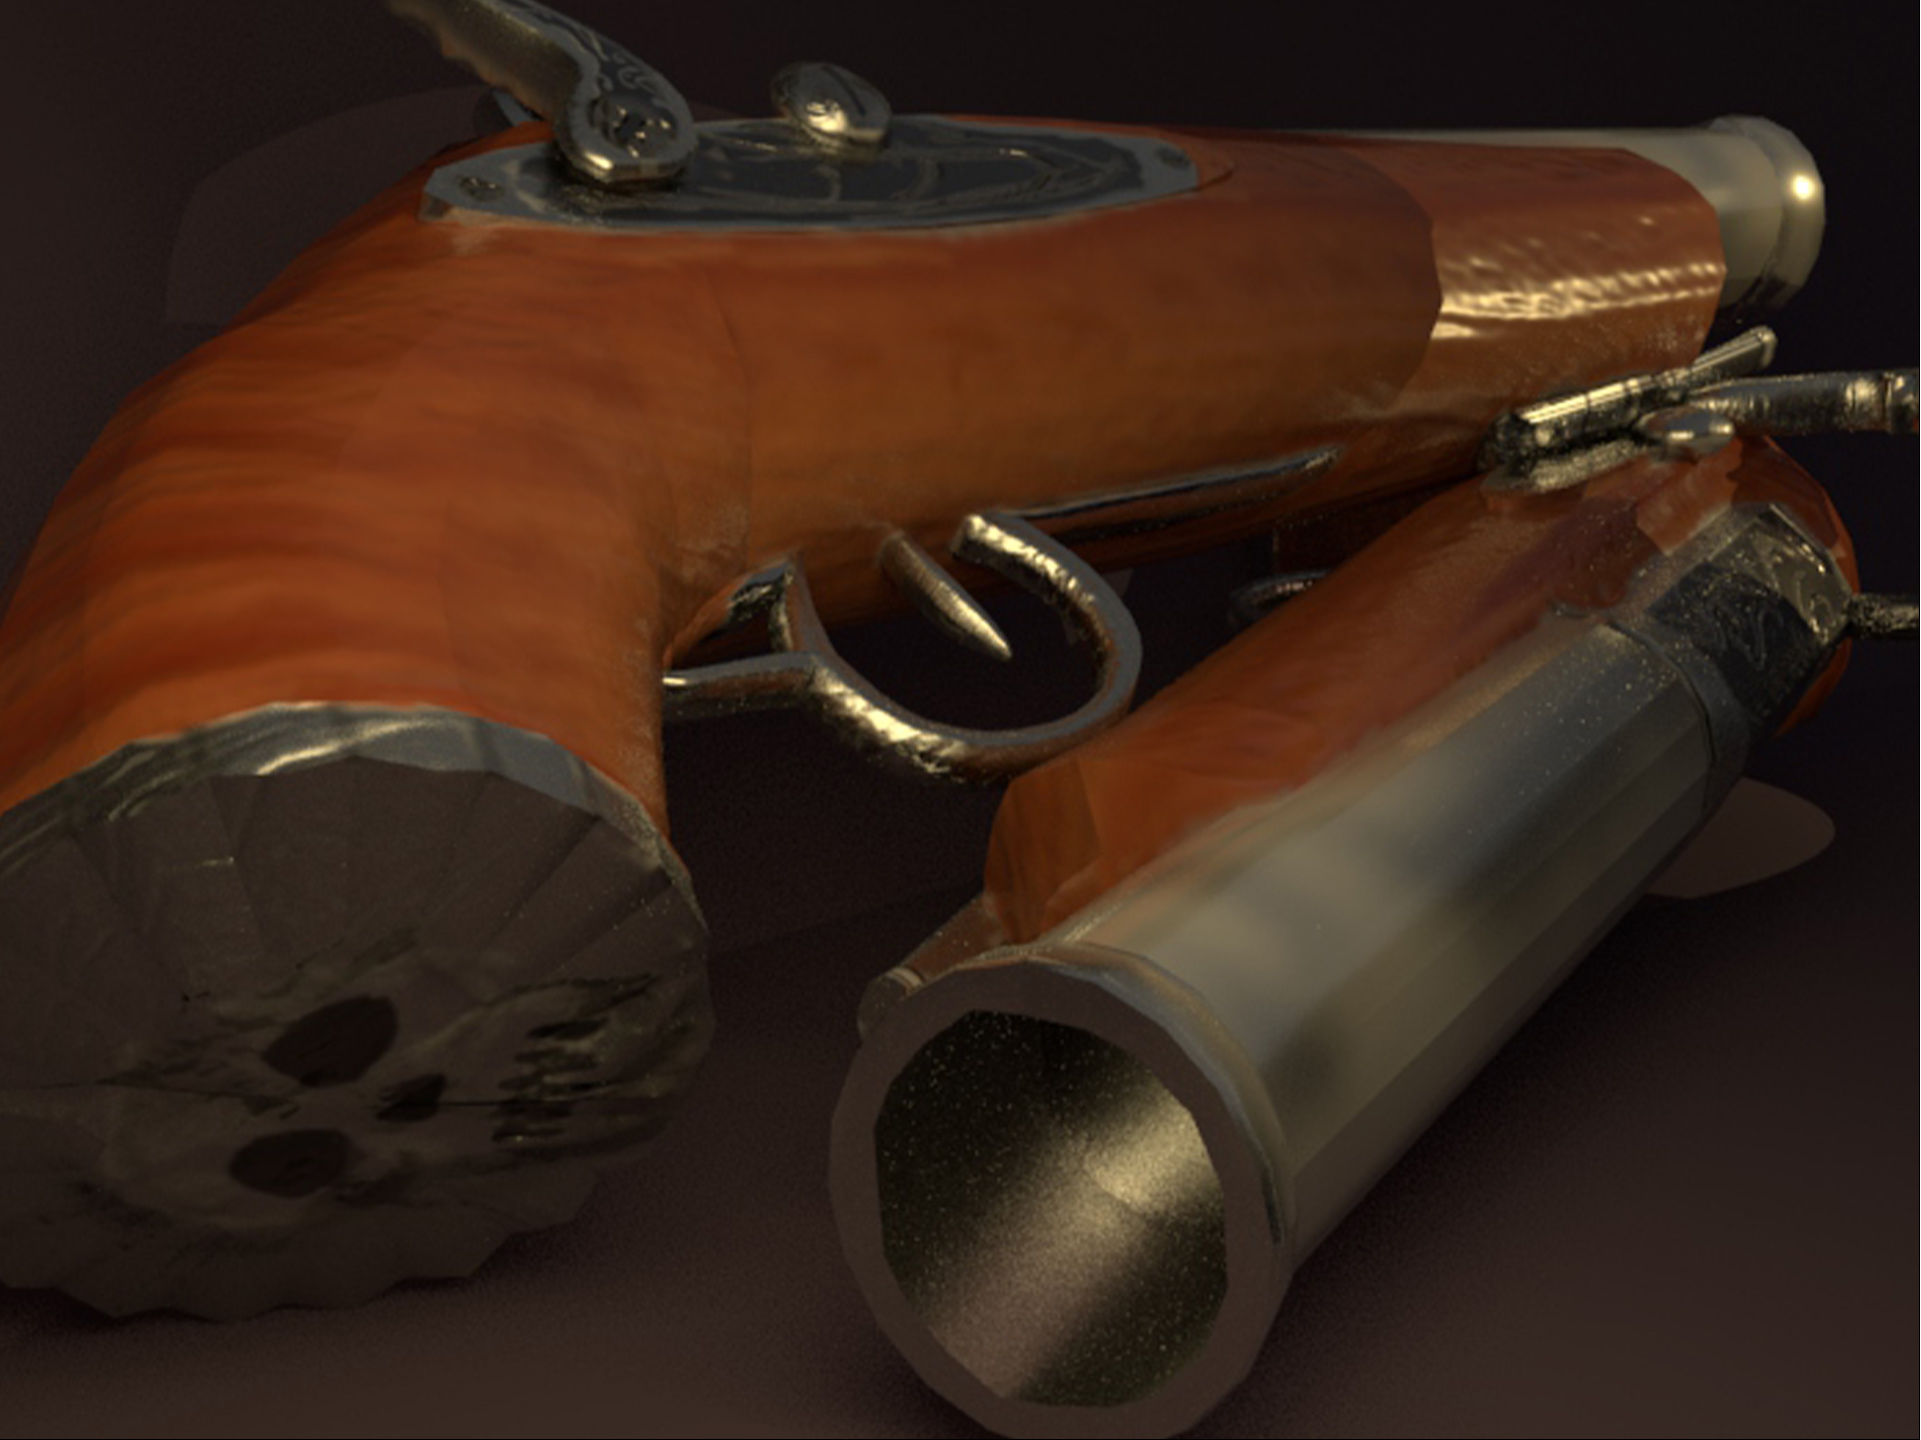 A closeup render of a 3d model of a pair of 18th century flintlock pistols. At the base of one gun, a skull engraving isi visible in the metal on the base.